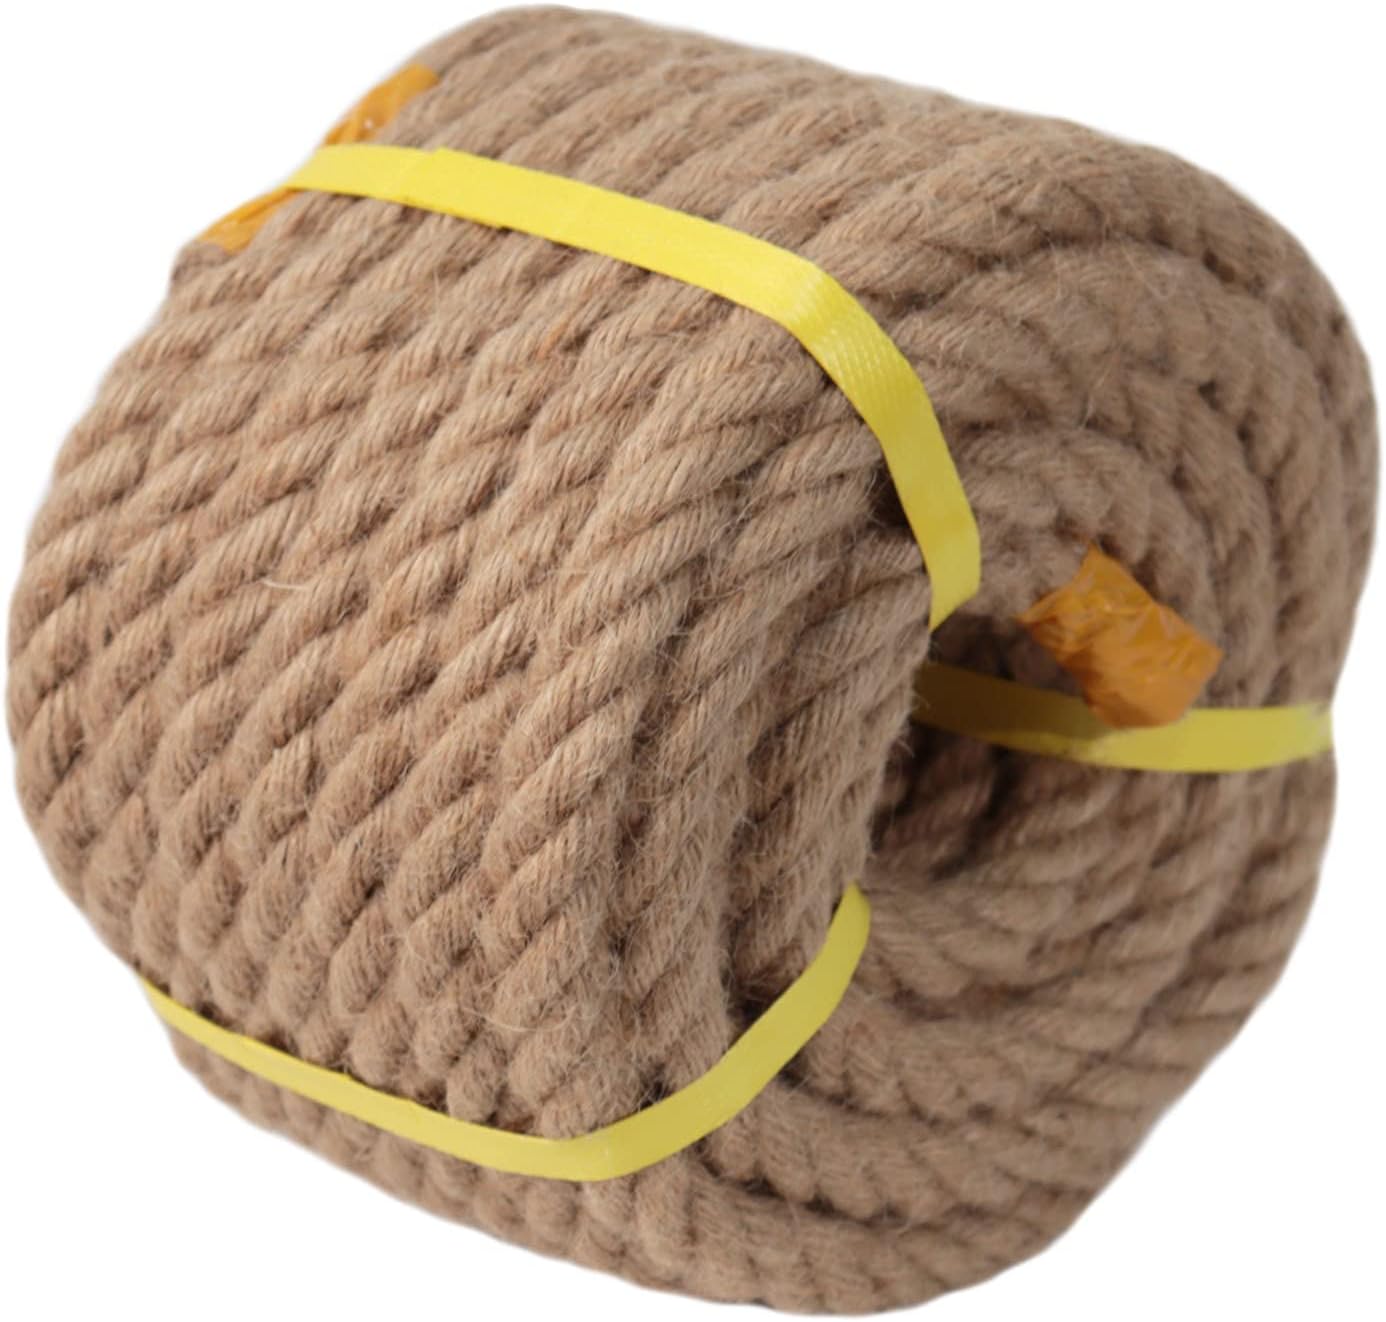 CRAYZA Twisted Manila Rope (3/4 in x 50 ft) Jute Rope Natural Hemp Rope for Crafting, Swing Bed, Railing, Docks